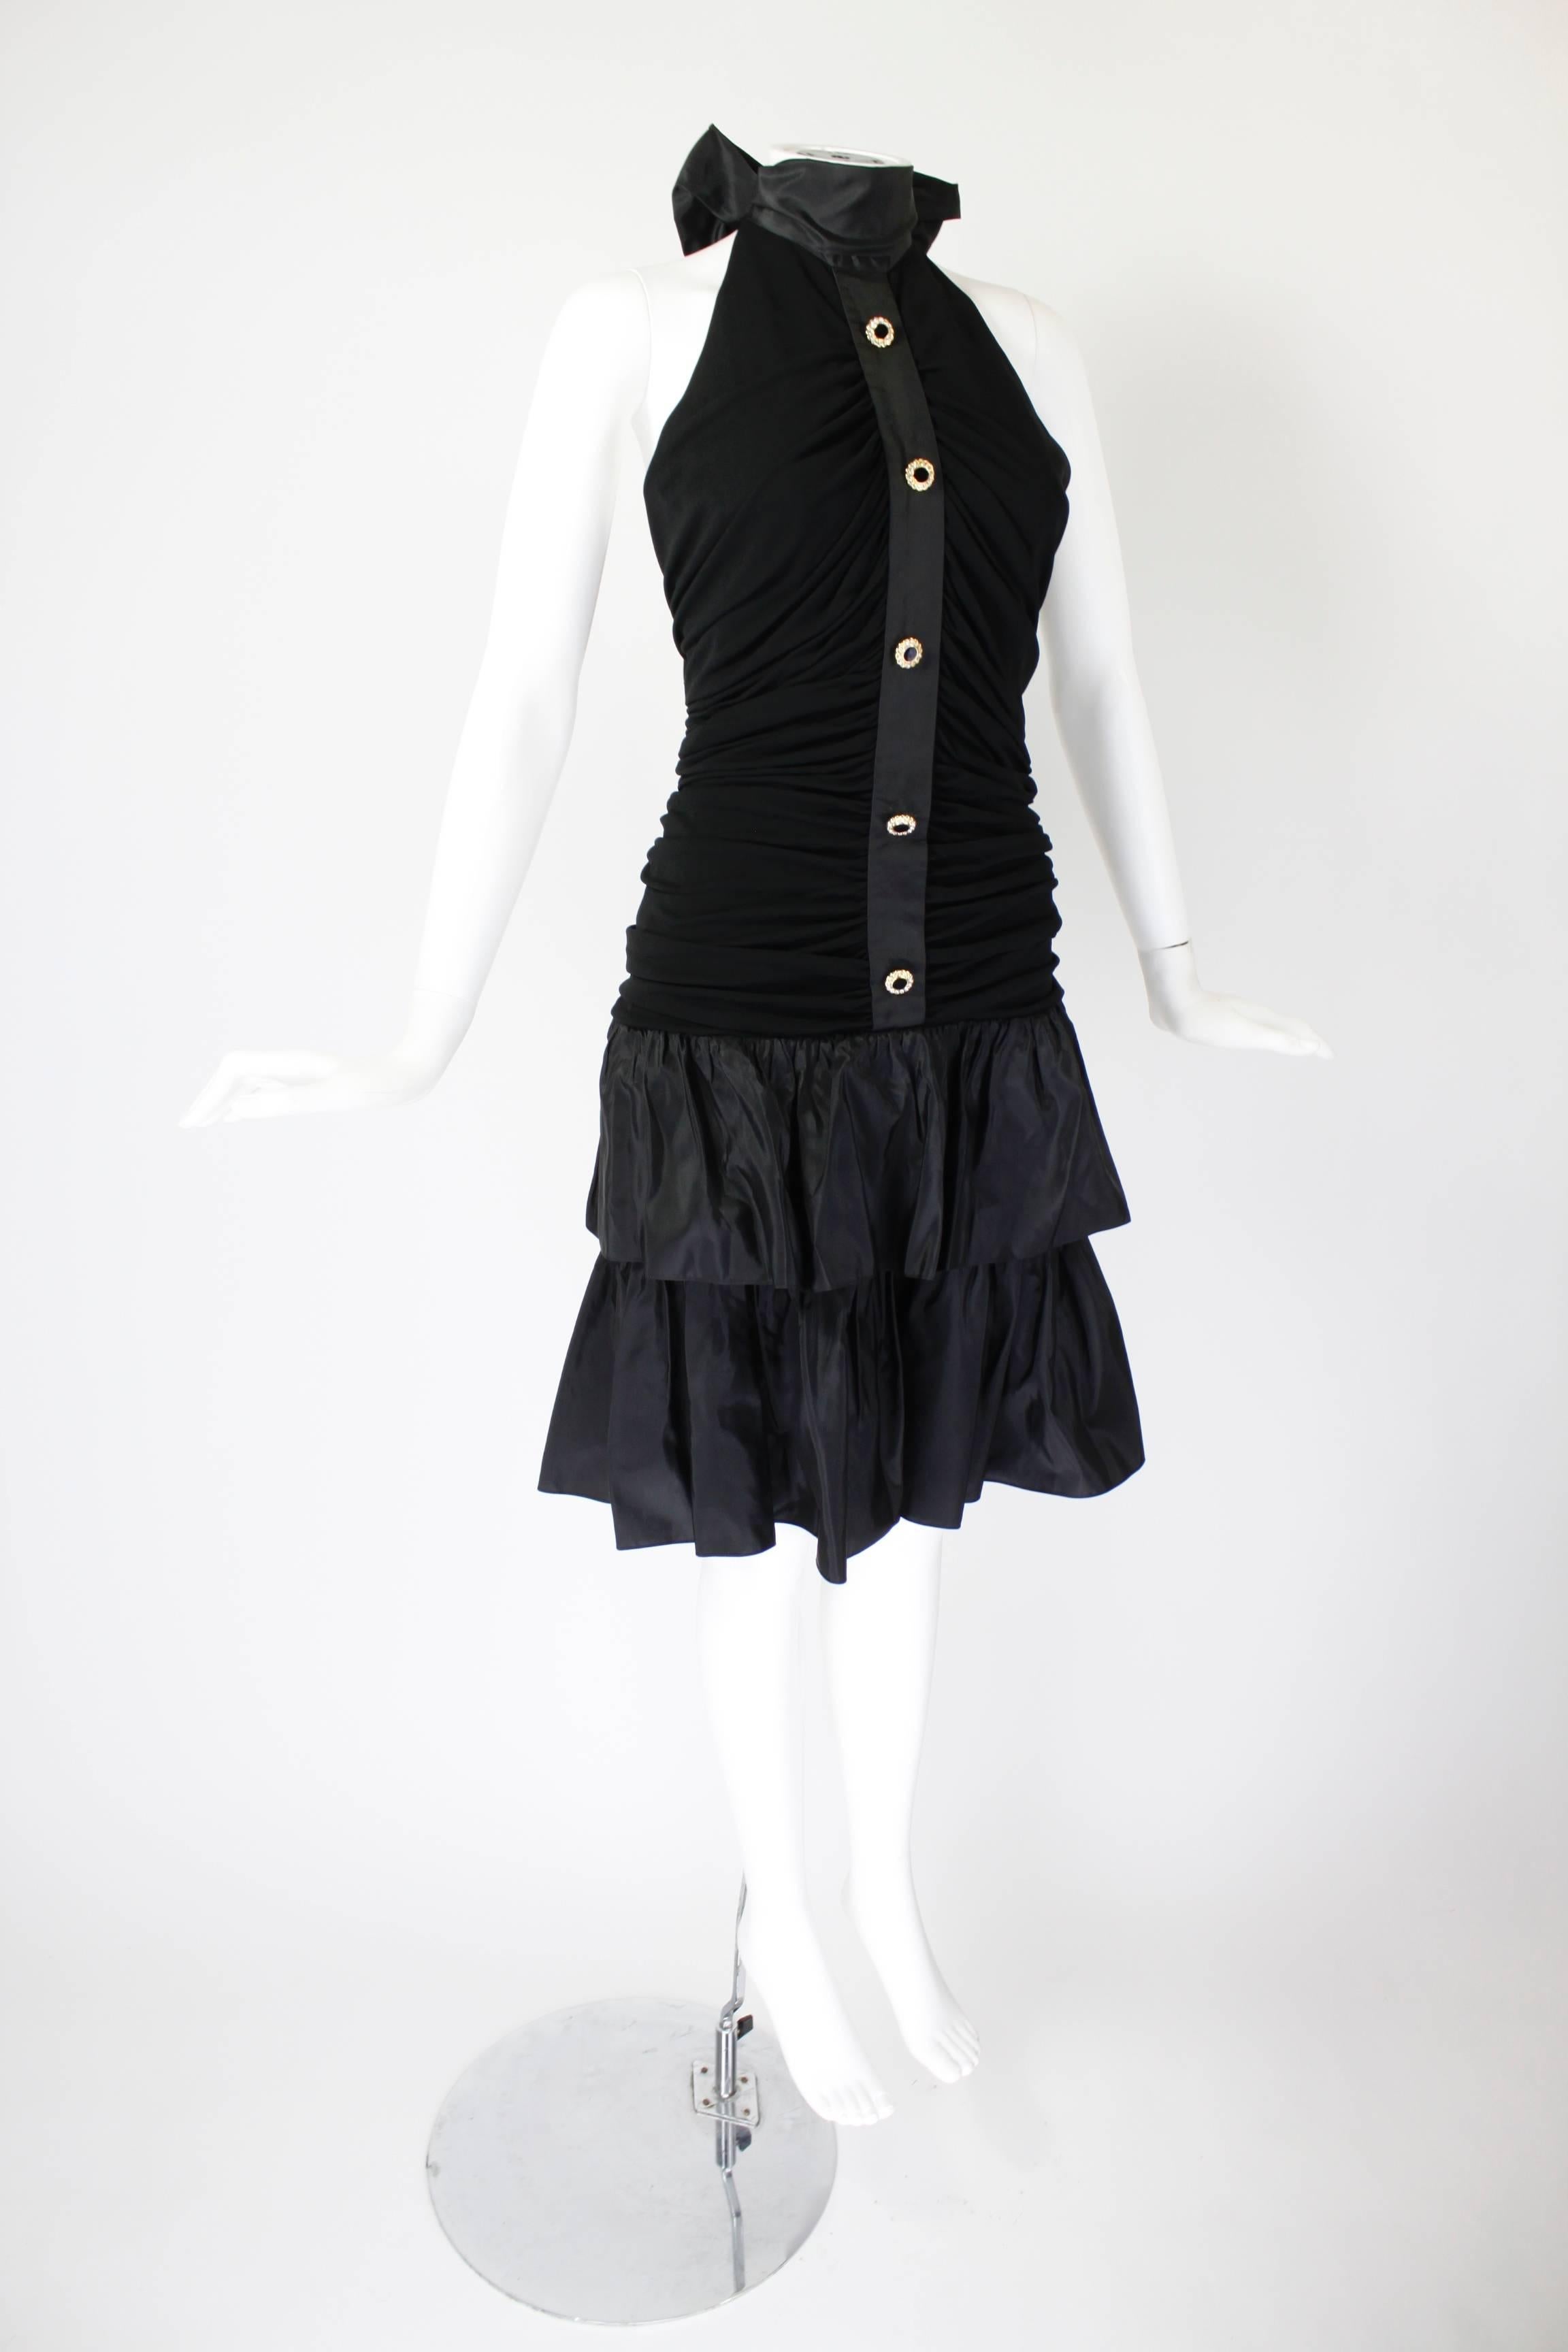 Women's 1980s Givenchy Black Ruched Cocktail Dress with Rhinestone Buttons